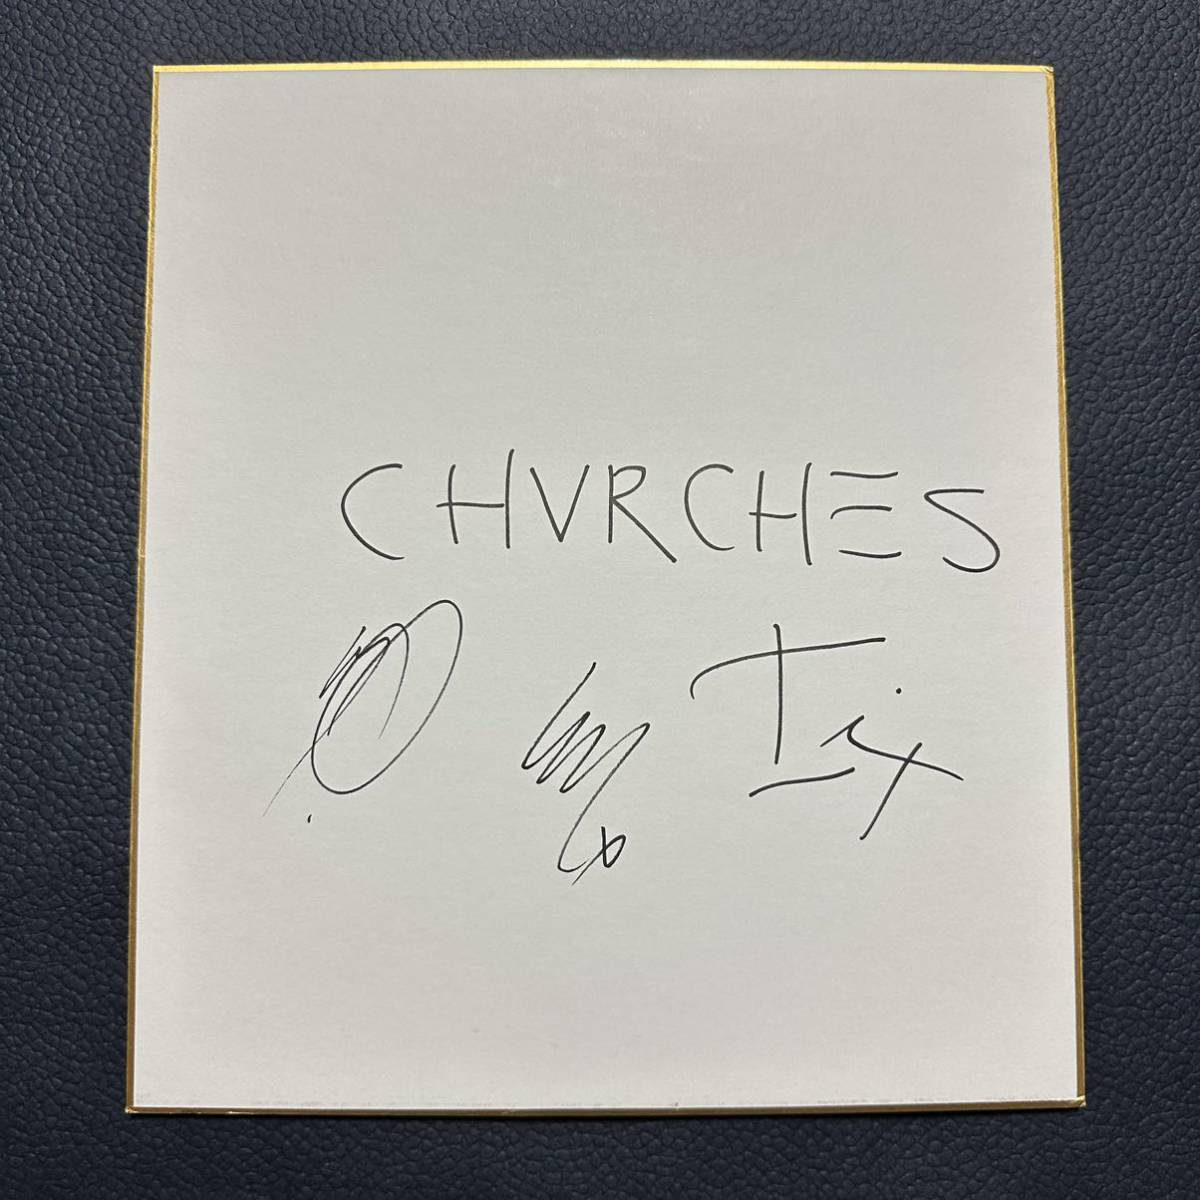 CHVRCHES Autographed Colored Paper CHVRCHES Rock Band Album CD Mneskin Marshmello, Celebrity Goods, sign